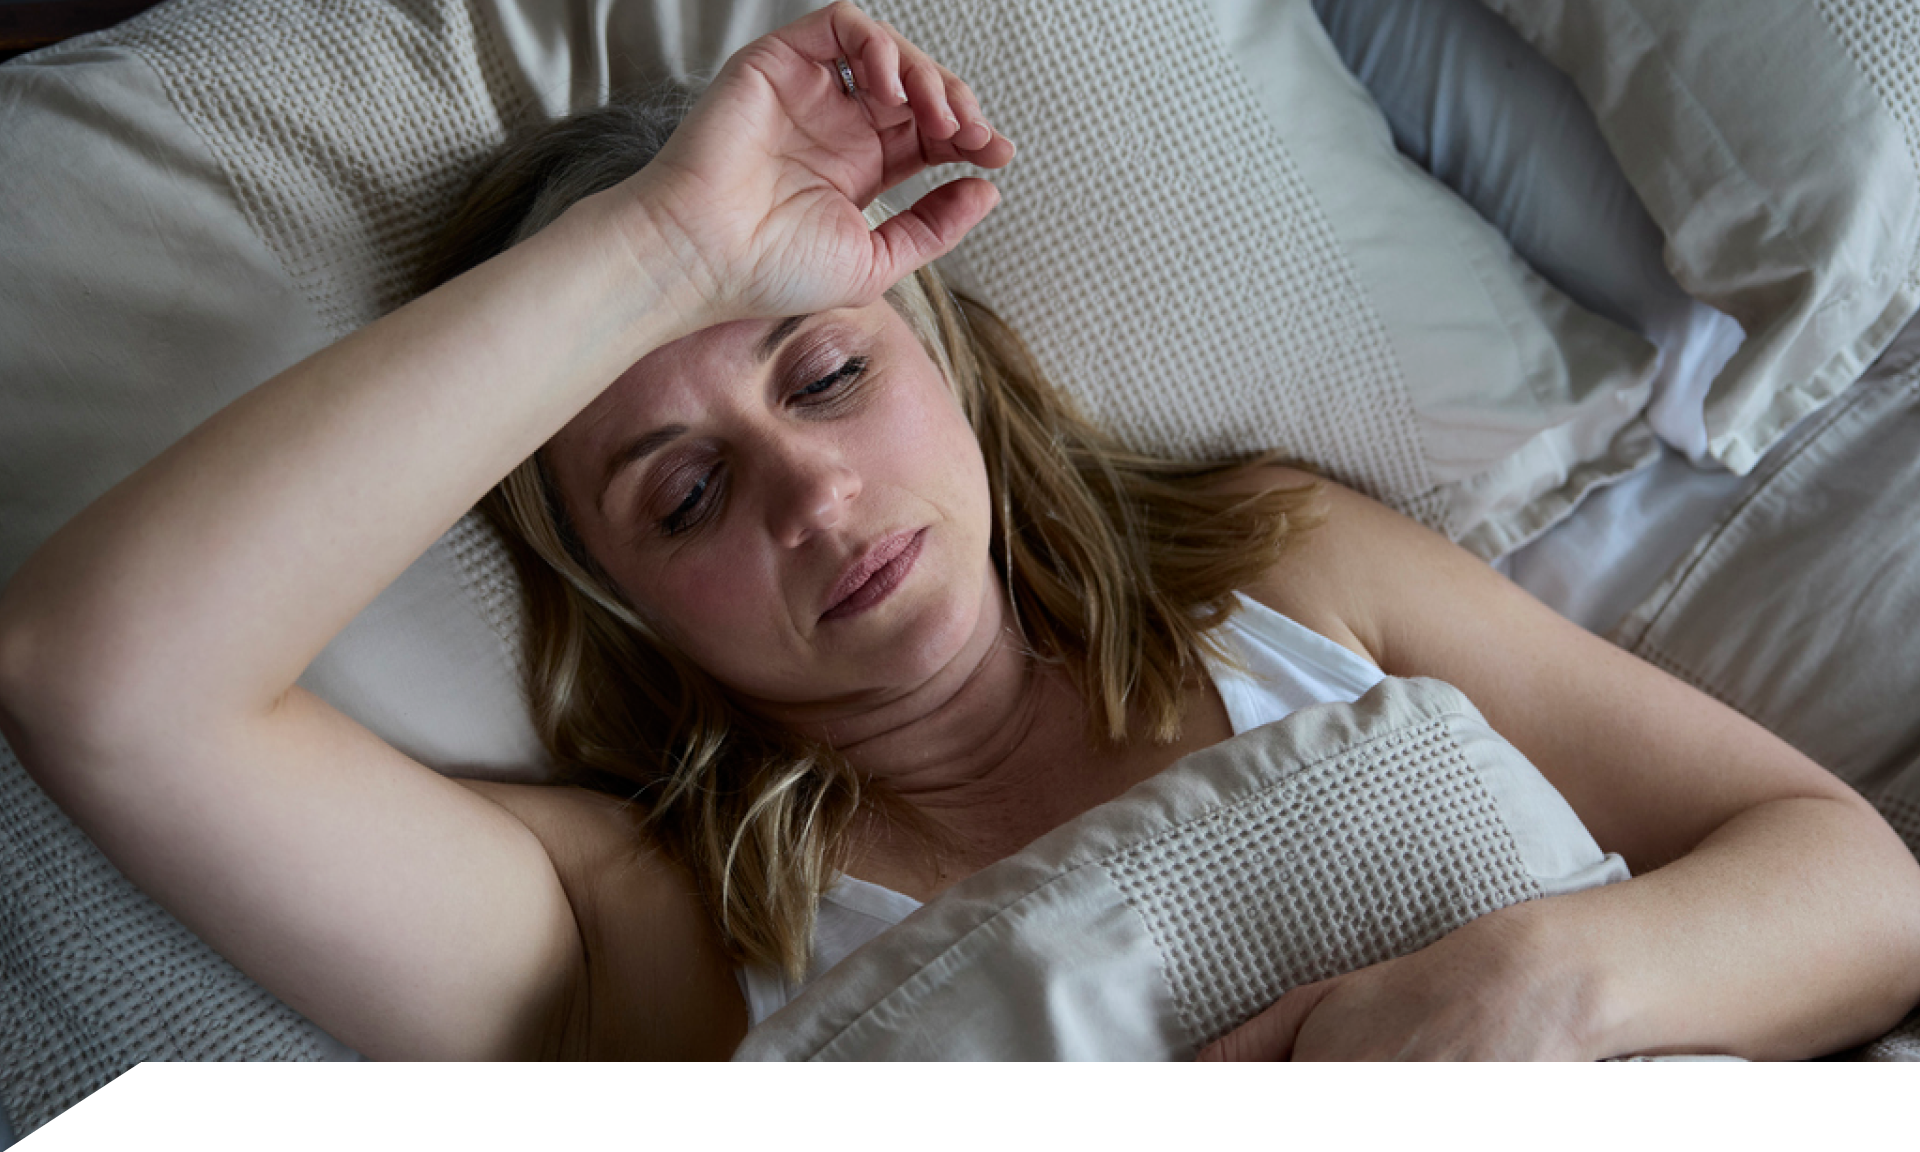 Woman laying on her back in bed with forearm across forehead